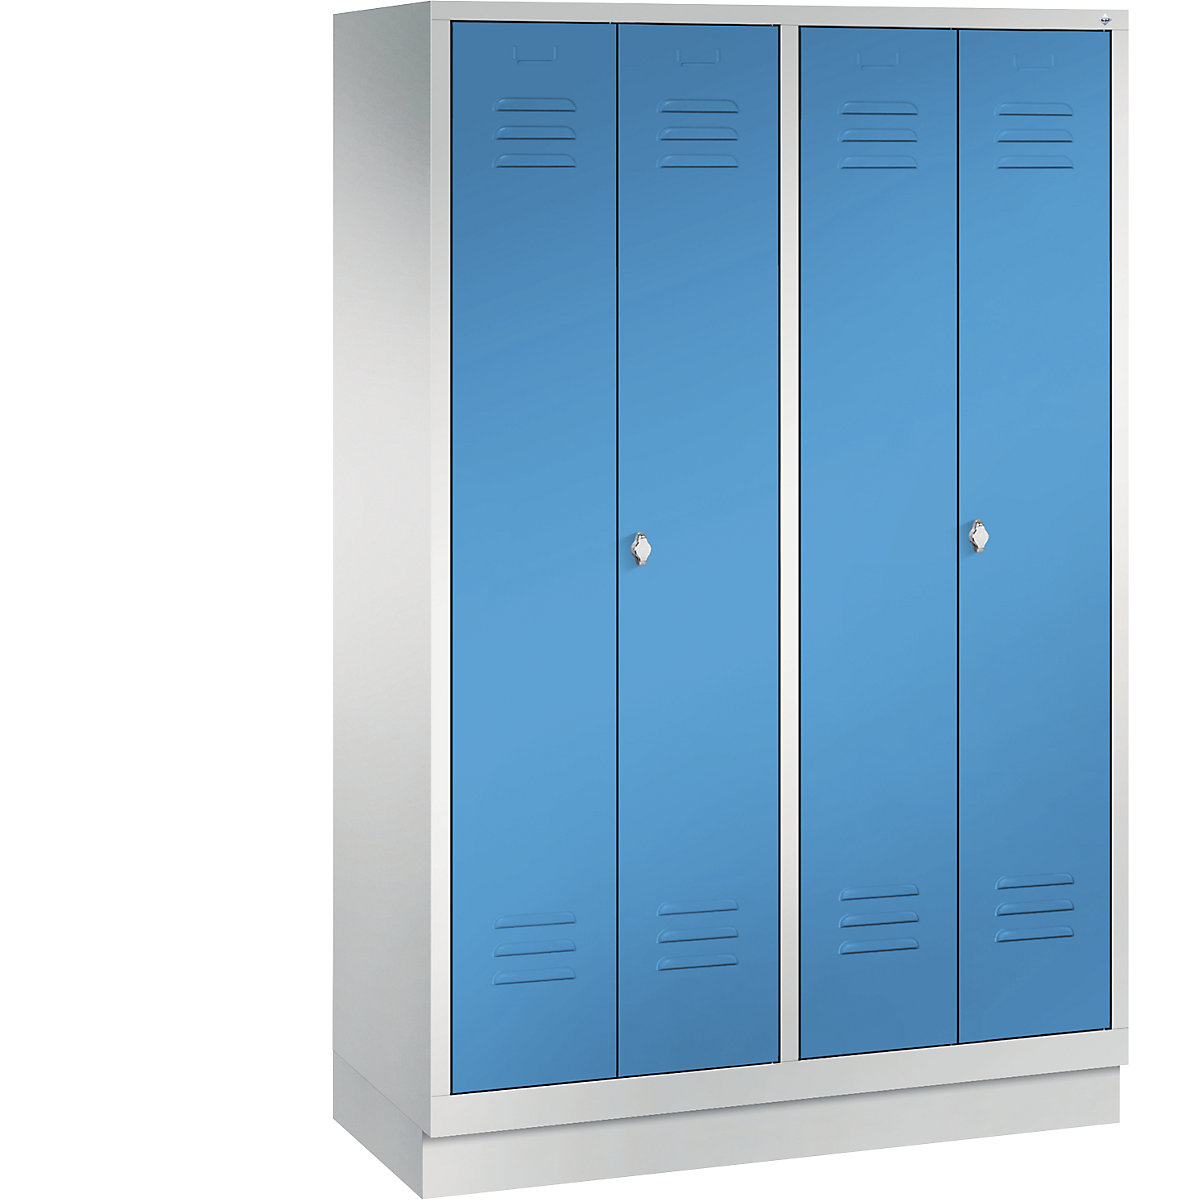 CLASSIC cloakroom locker with plinth, doors close in the middle – C+P, 4 compartments, compartment width 300 mm, light grey / light blue-3